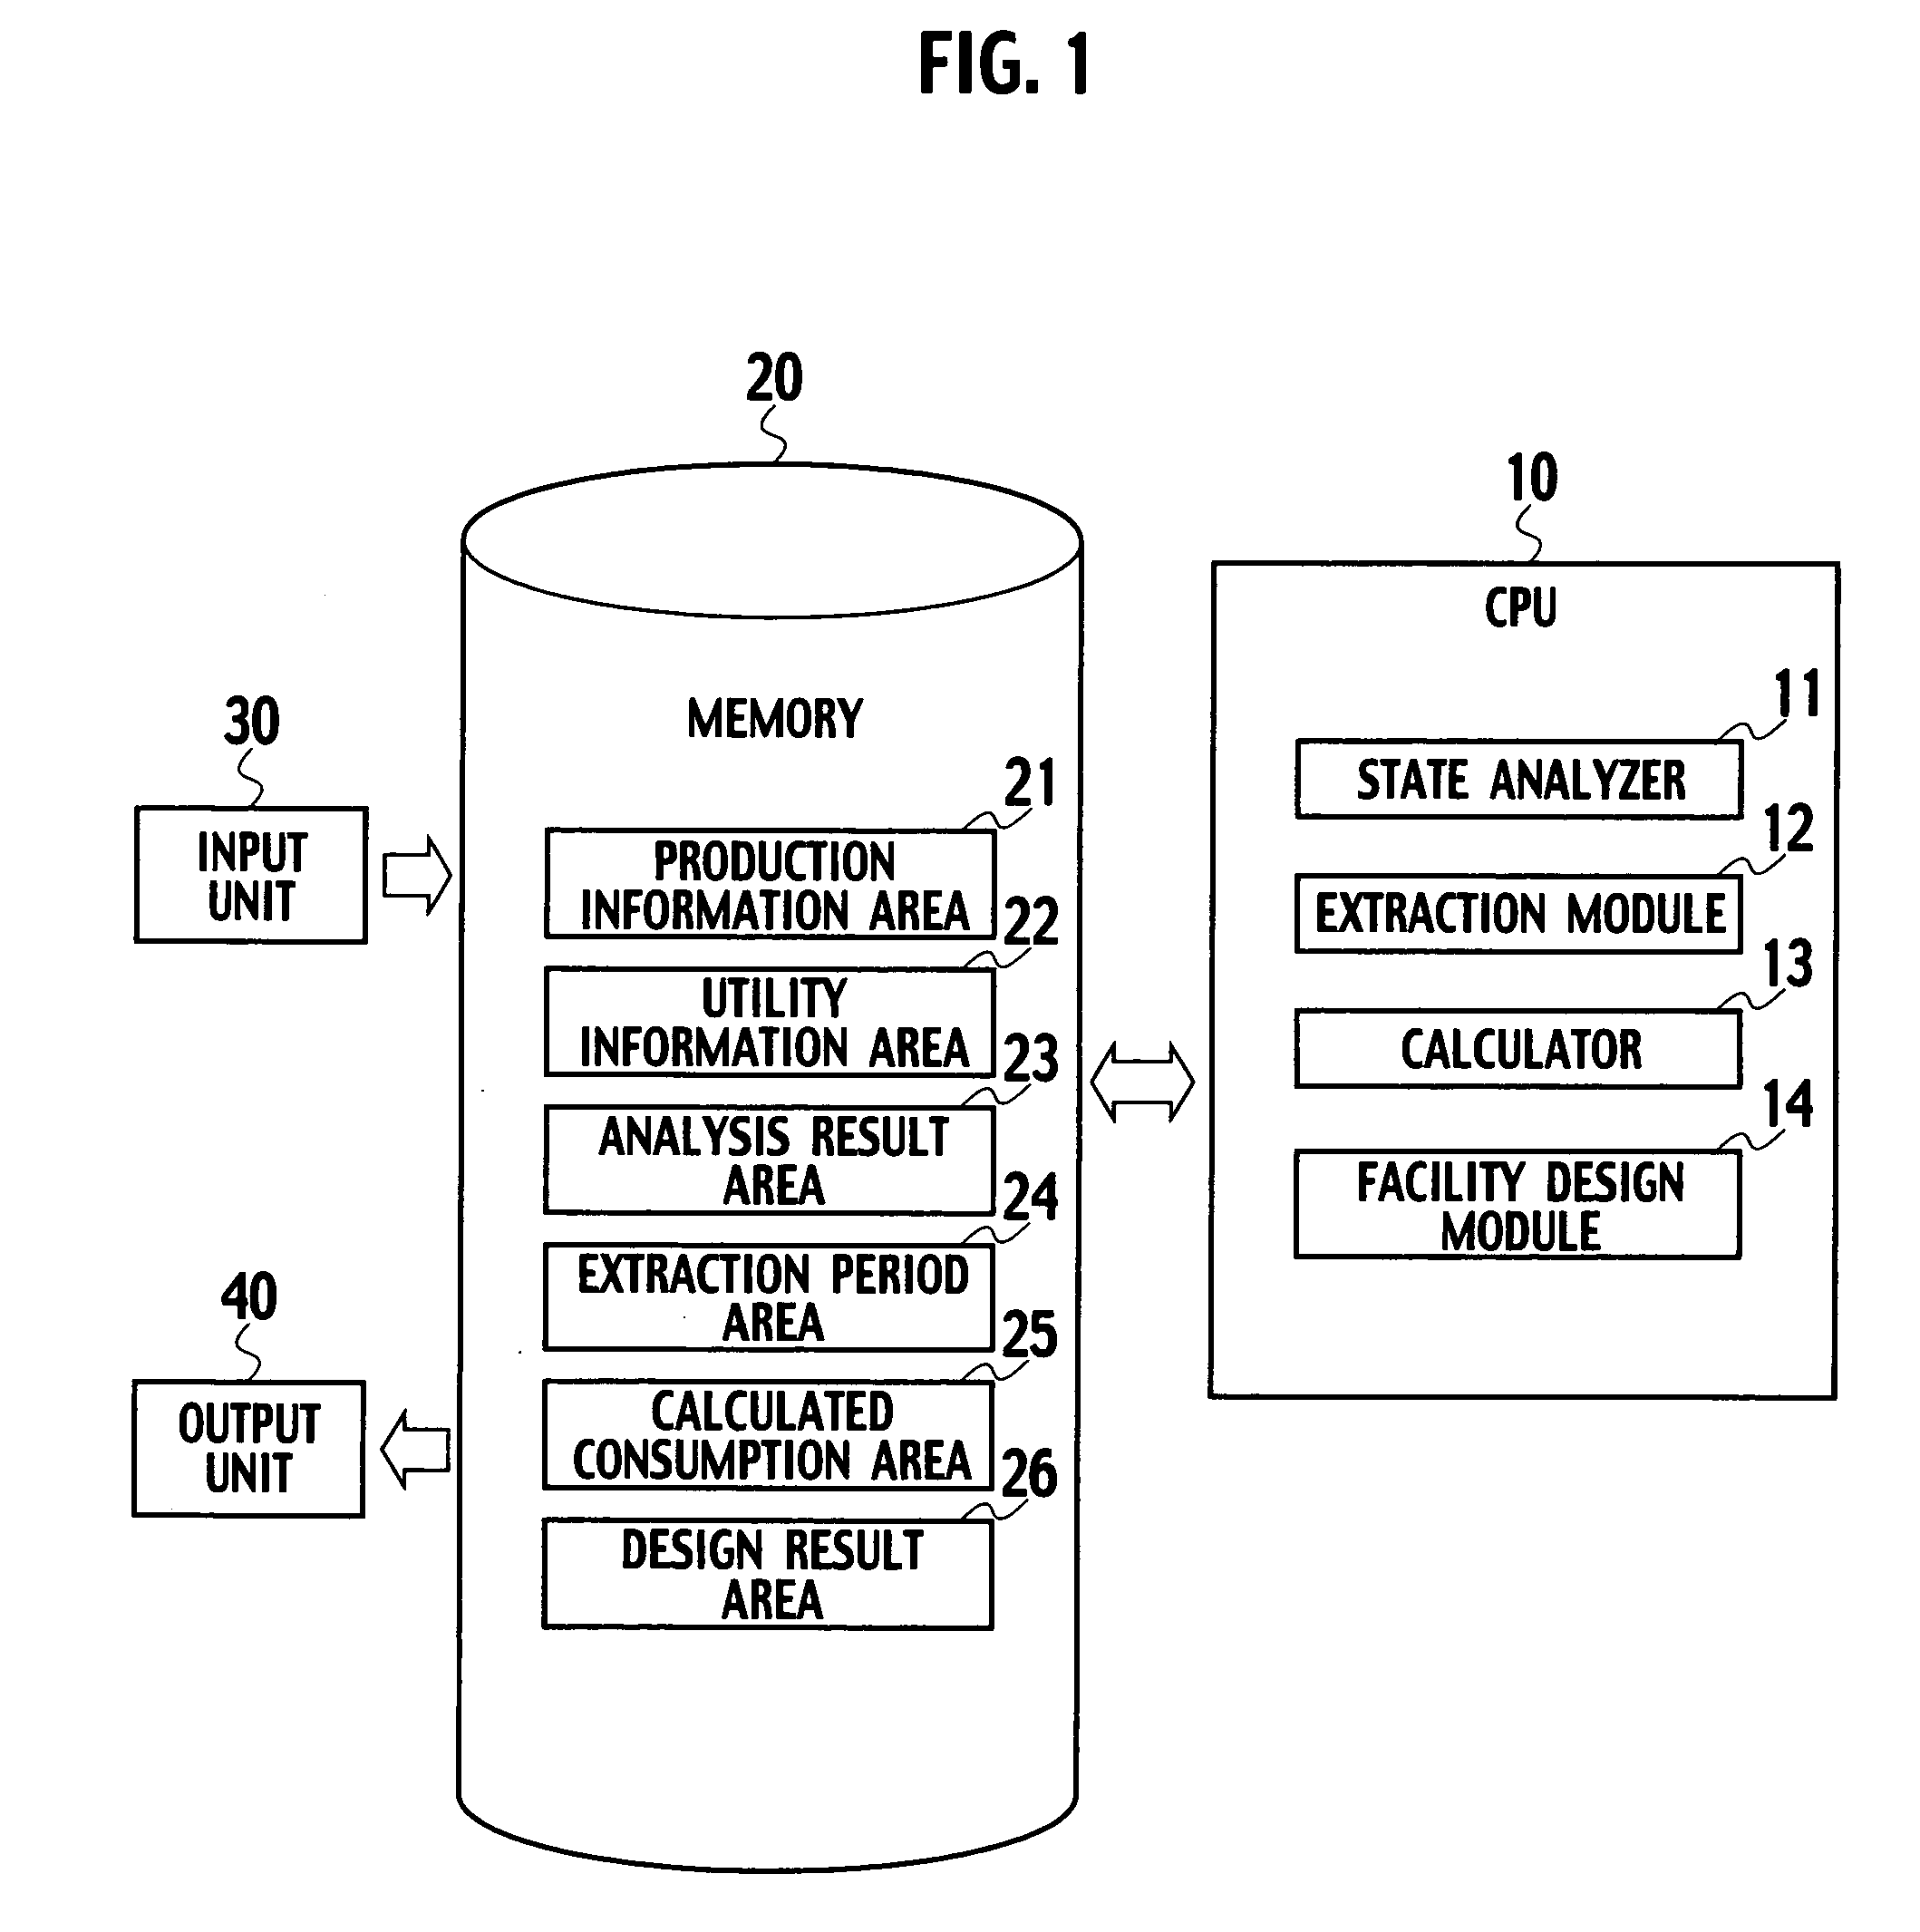 System, method and program for designing a utility facility and method for manufacturing a product by the utility facility